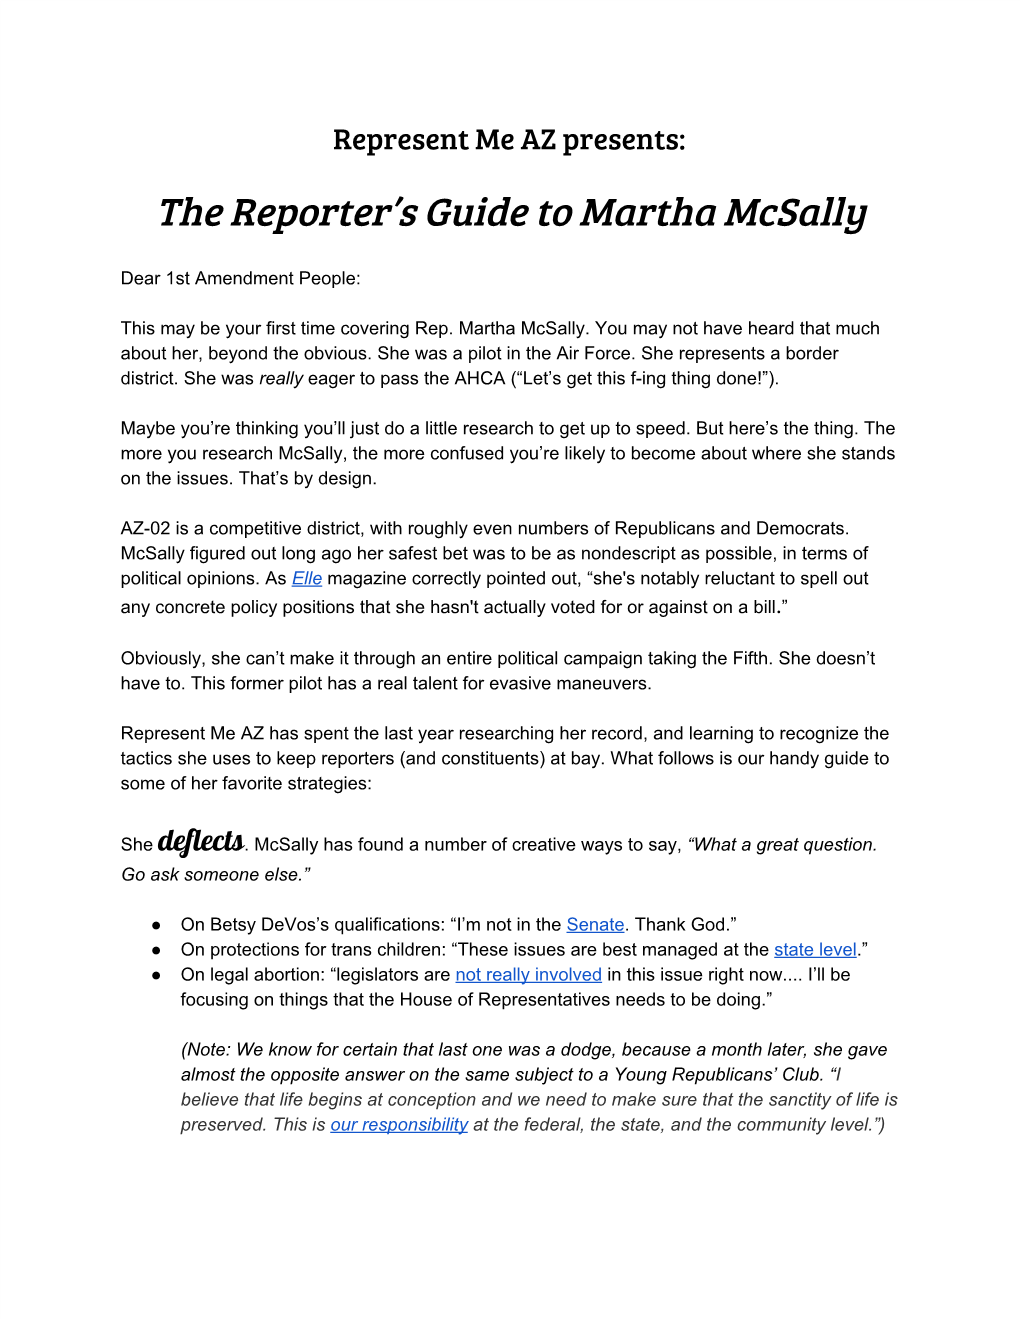 The Reporter's Guide to Martha Mcsally